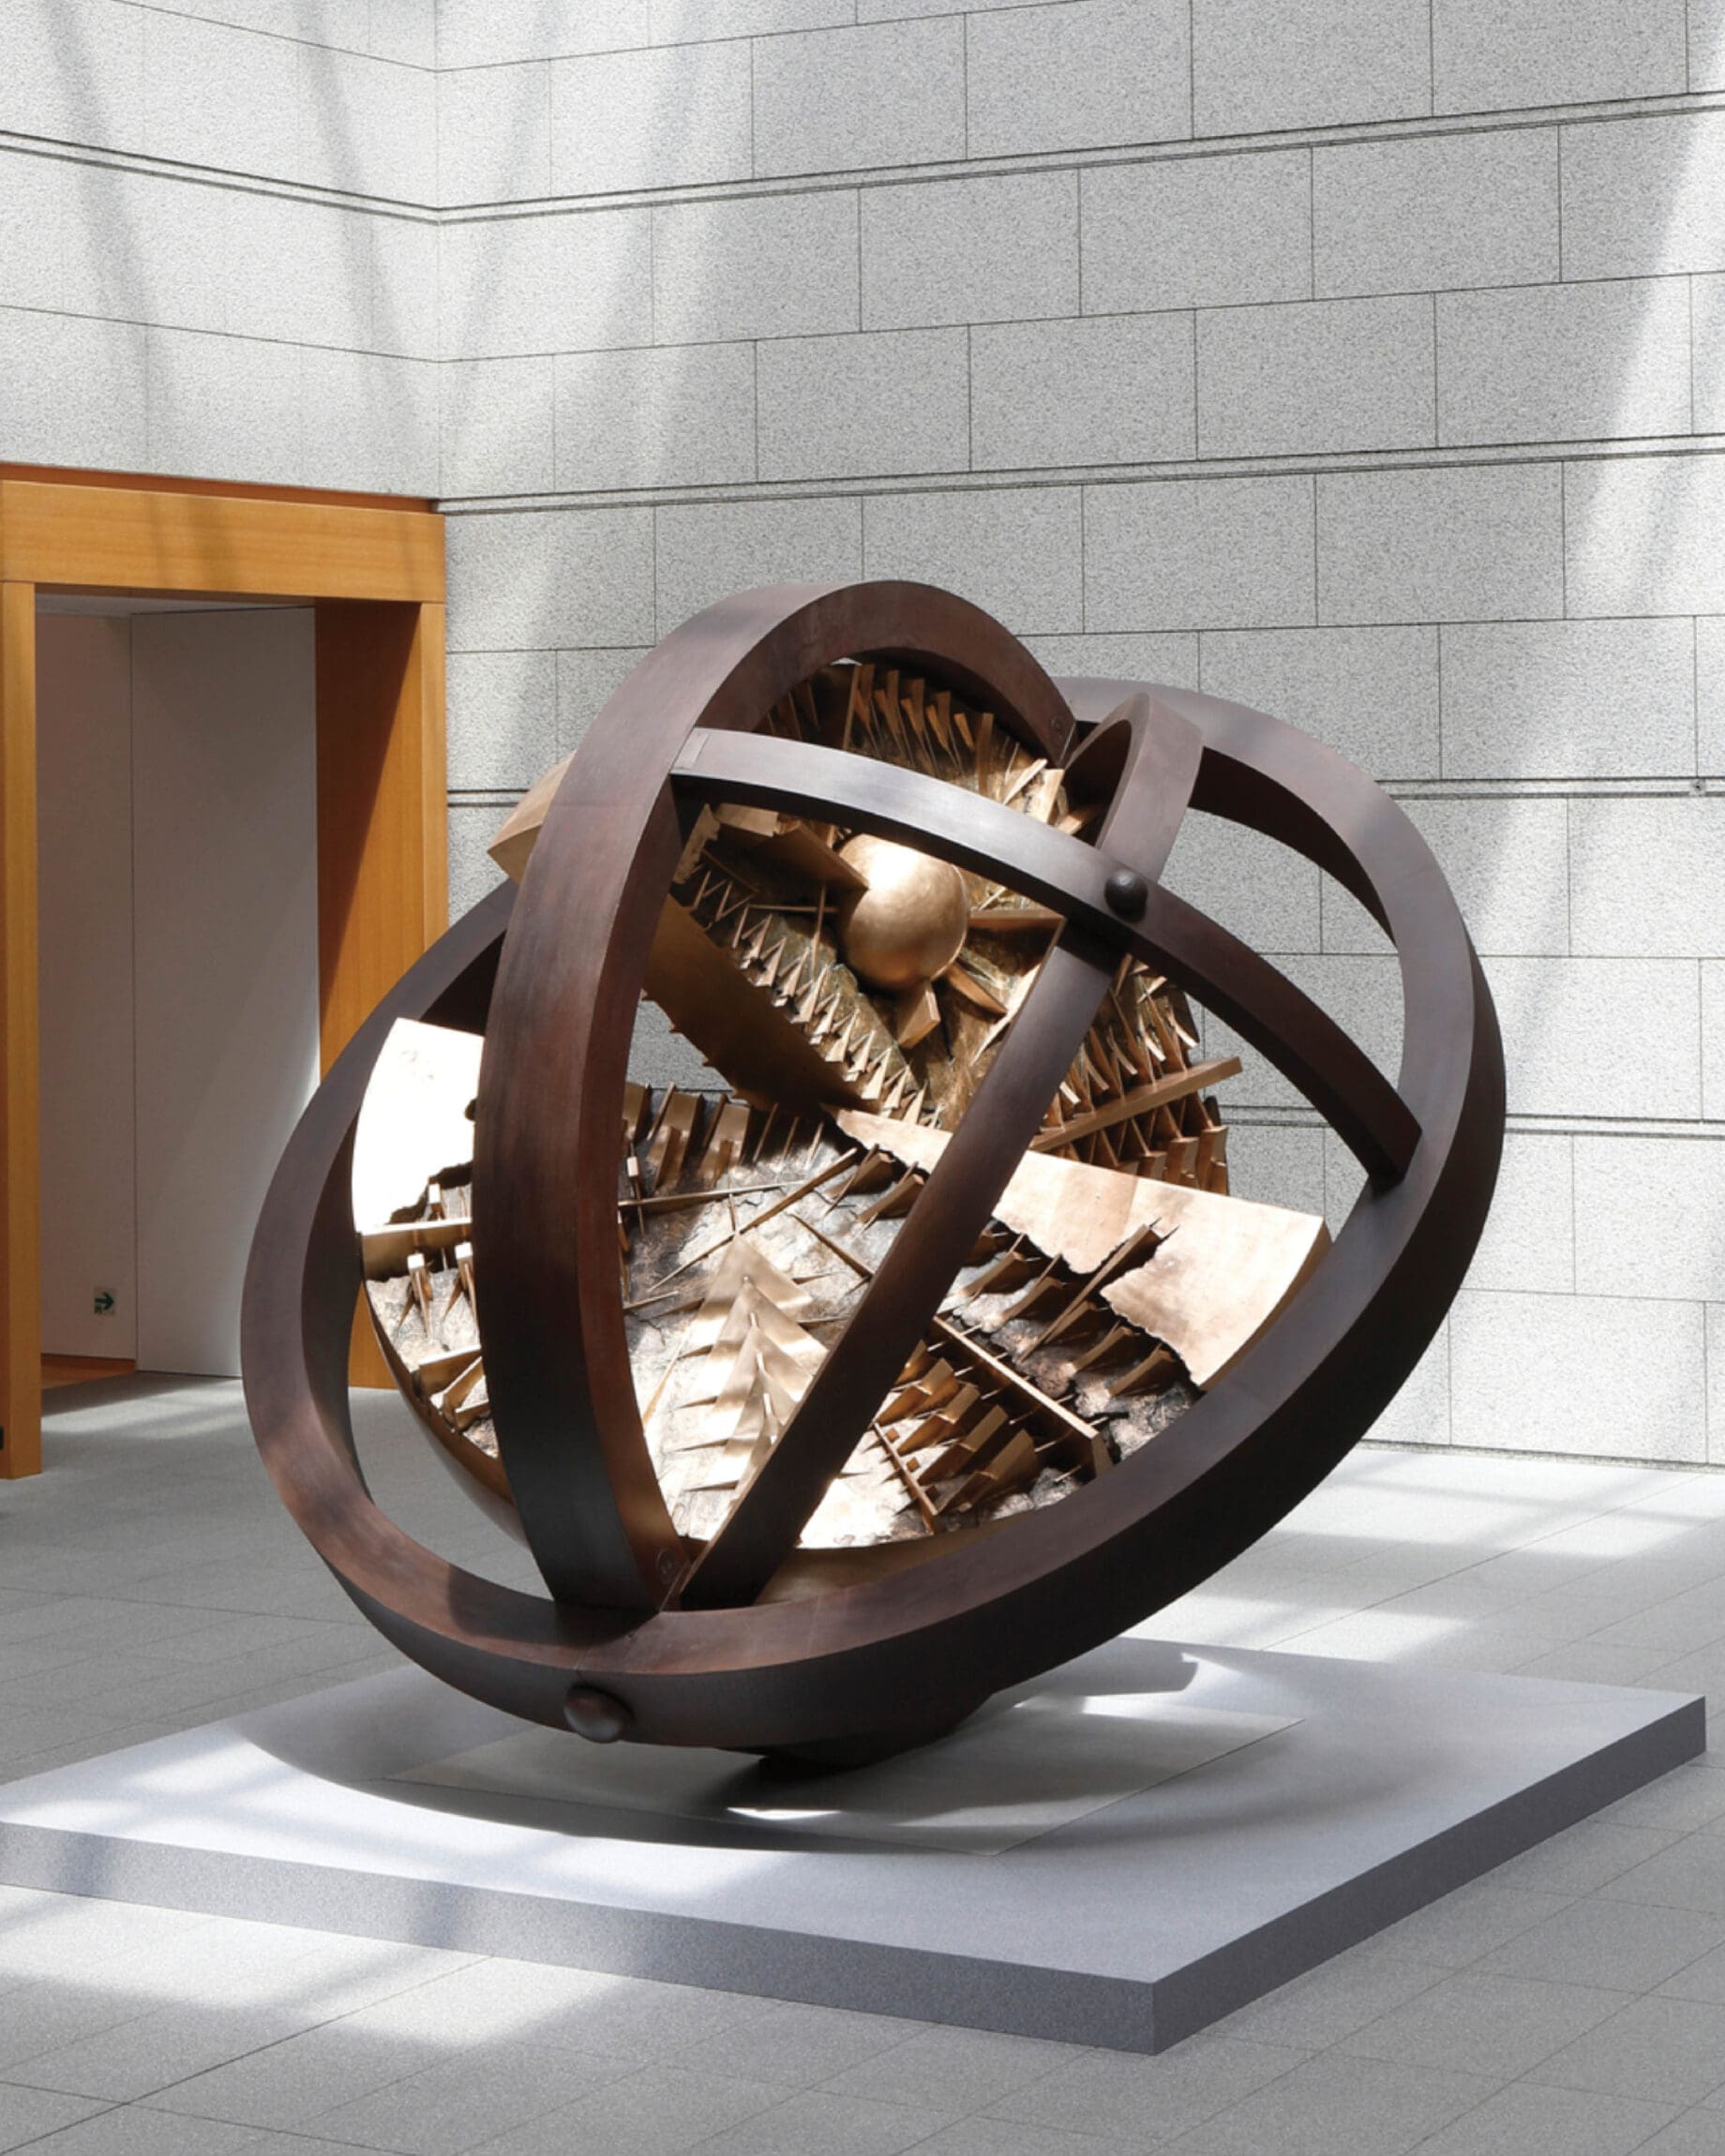 The best museums ans galleries in Tokyo |" Gyroscope of the Sun by Arnaldo Pomodoro on view at MOT Tokyo